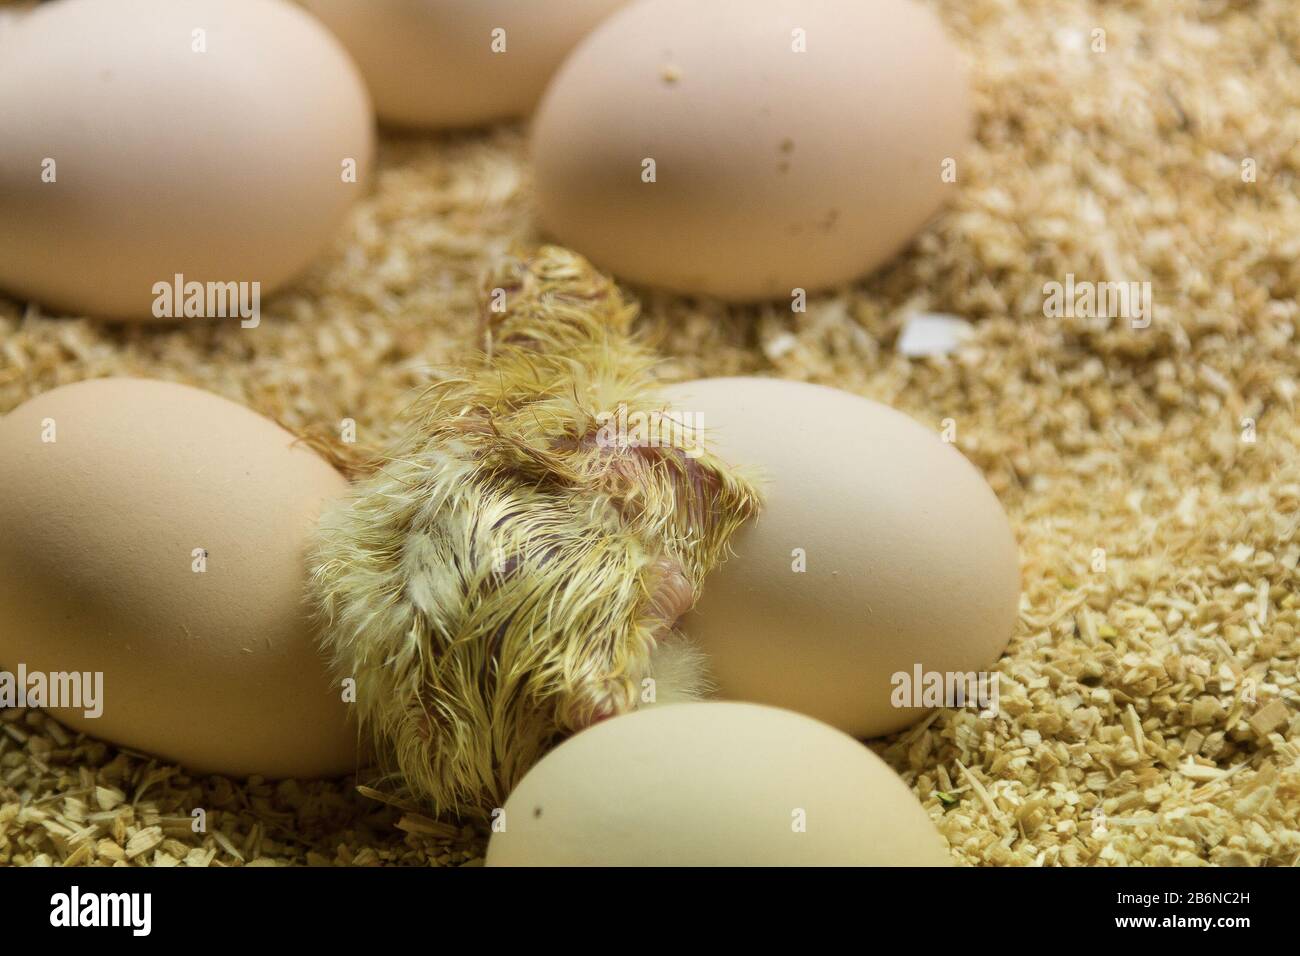 I dating newborn chick egg hen rooster (Gallus) Stock Photo